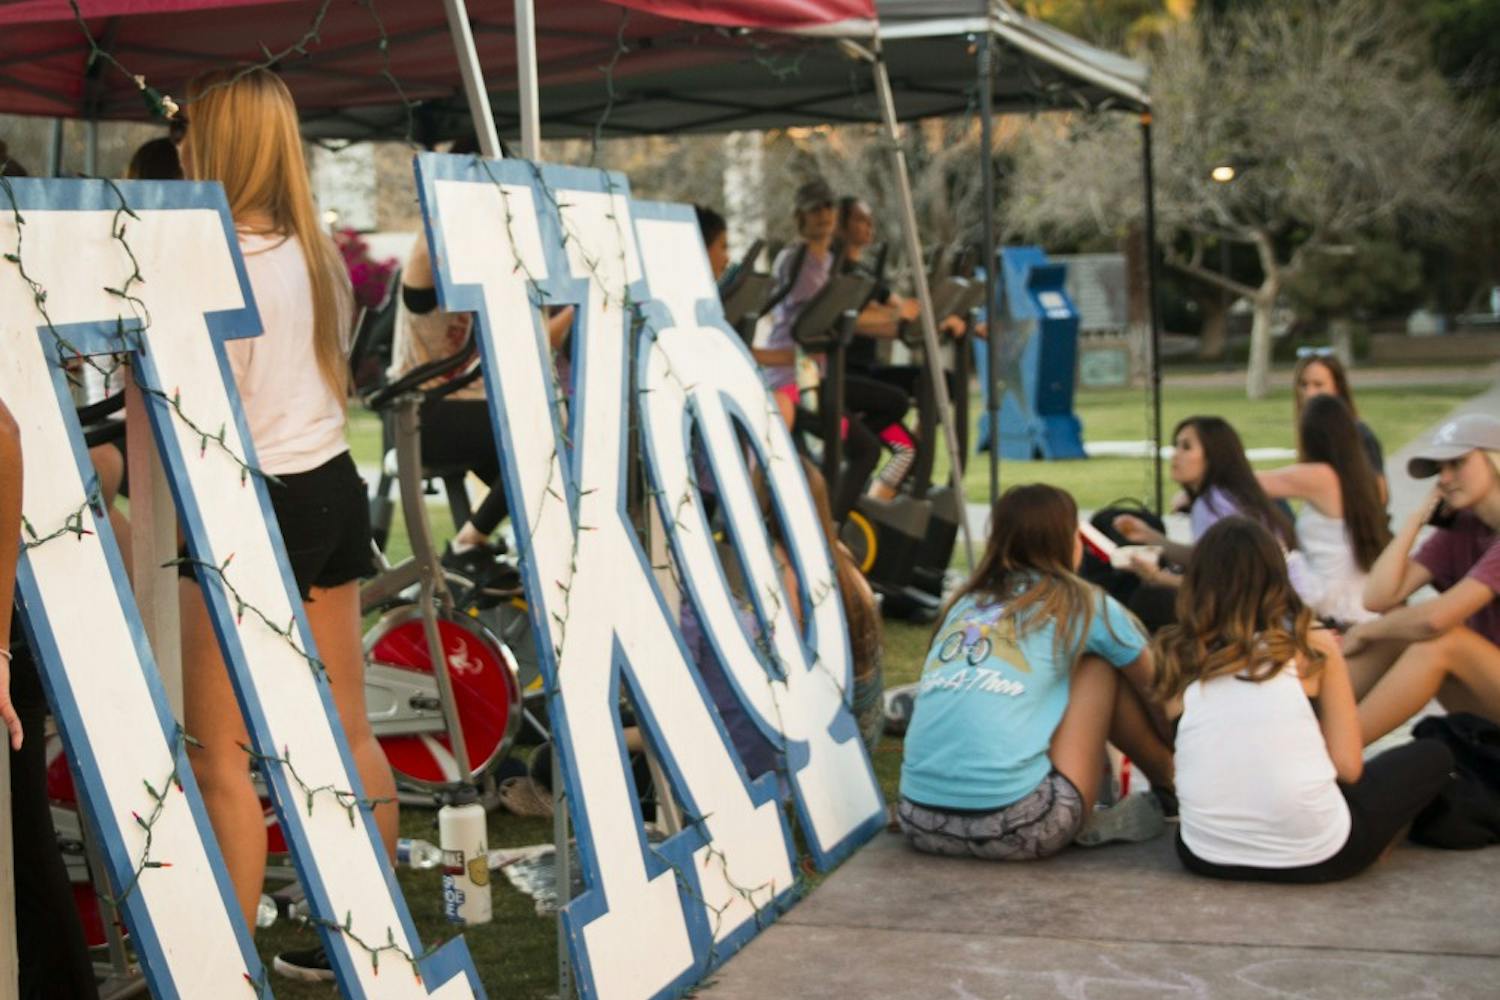 ASU students participate in Pi Kappa Phi's annual event, Bike-A-Thon, at Hayden Lawn at ASU's Tempe campus on Wednesday, March 29, 2017.